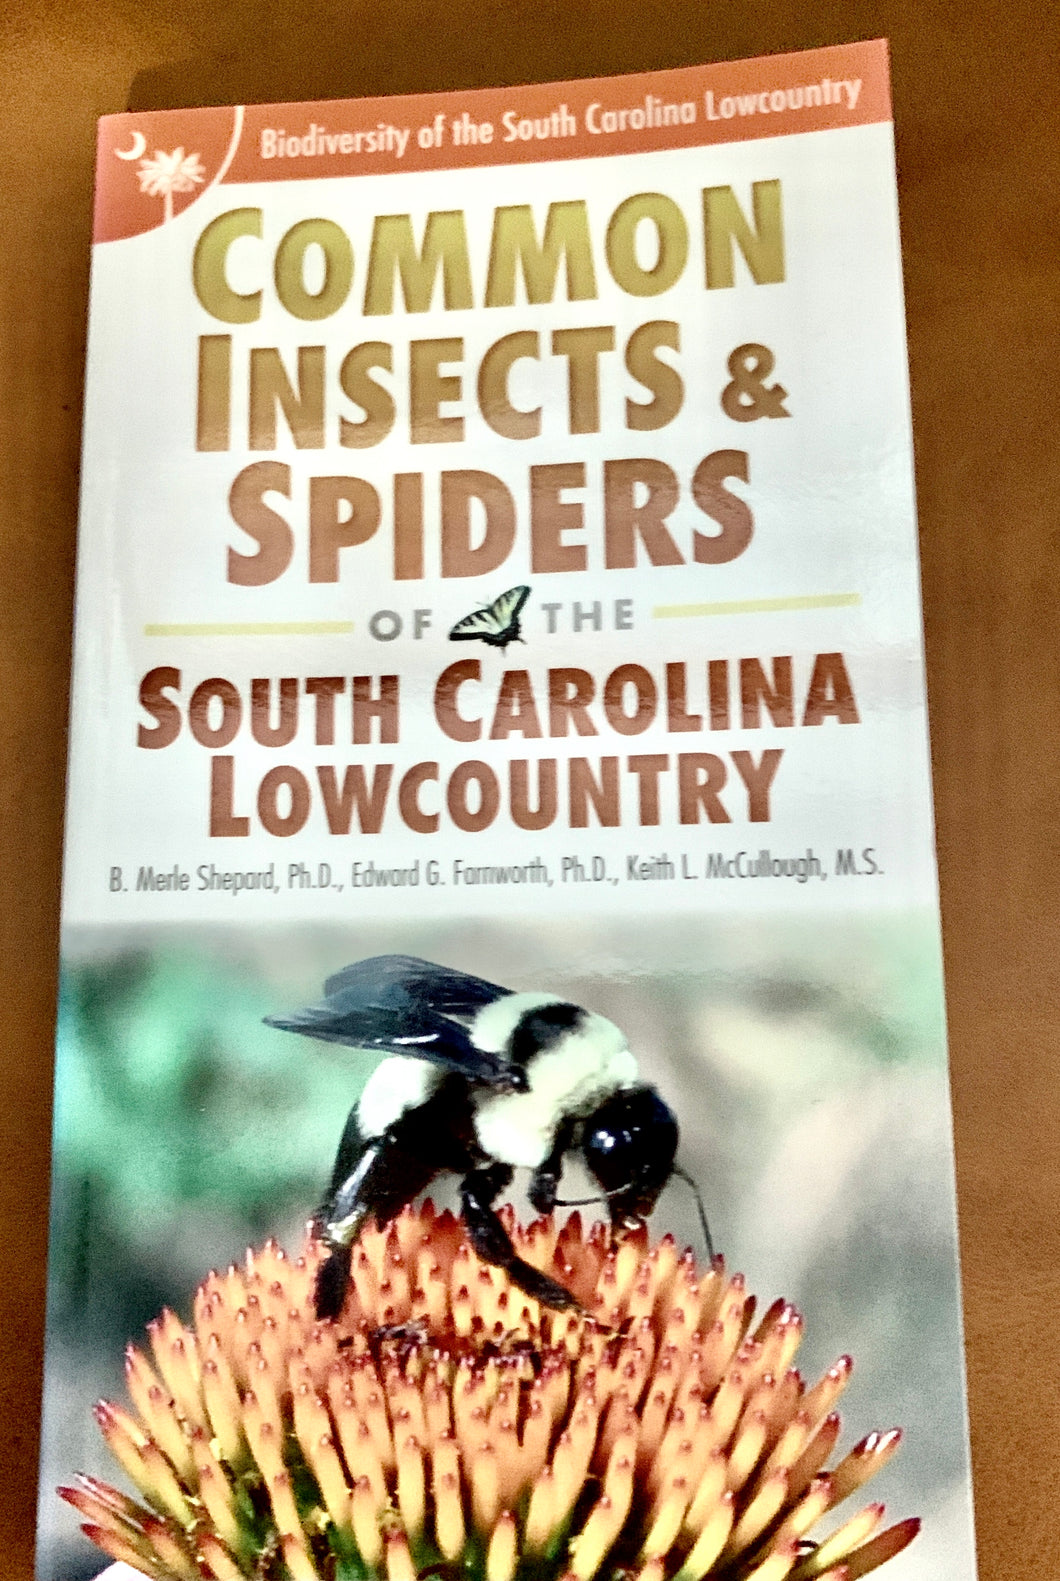 Common Insects and Spiders of the South Carolina Lowcountry-Field Guide ~ Merle Shepherd, Ed Farnworth & Keith McCollough